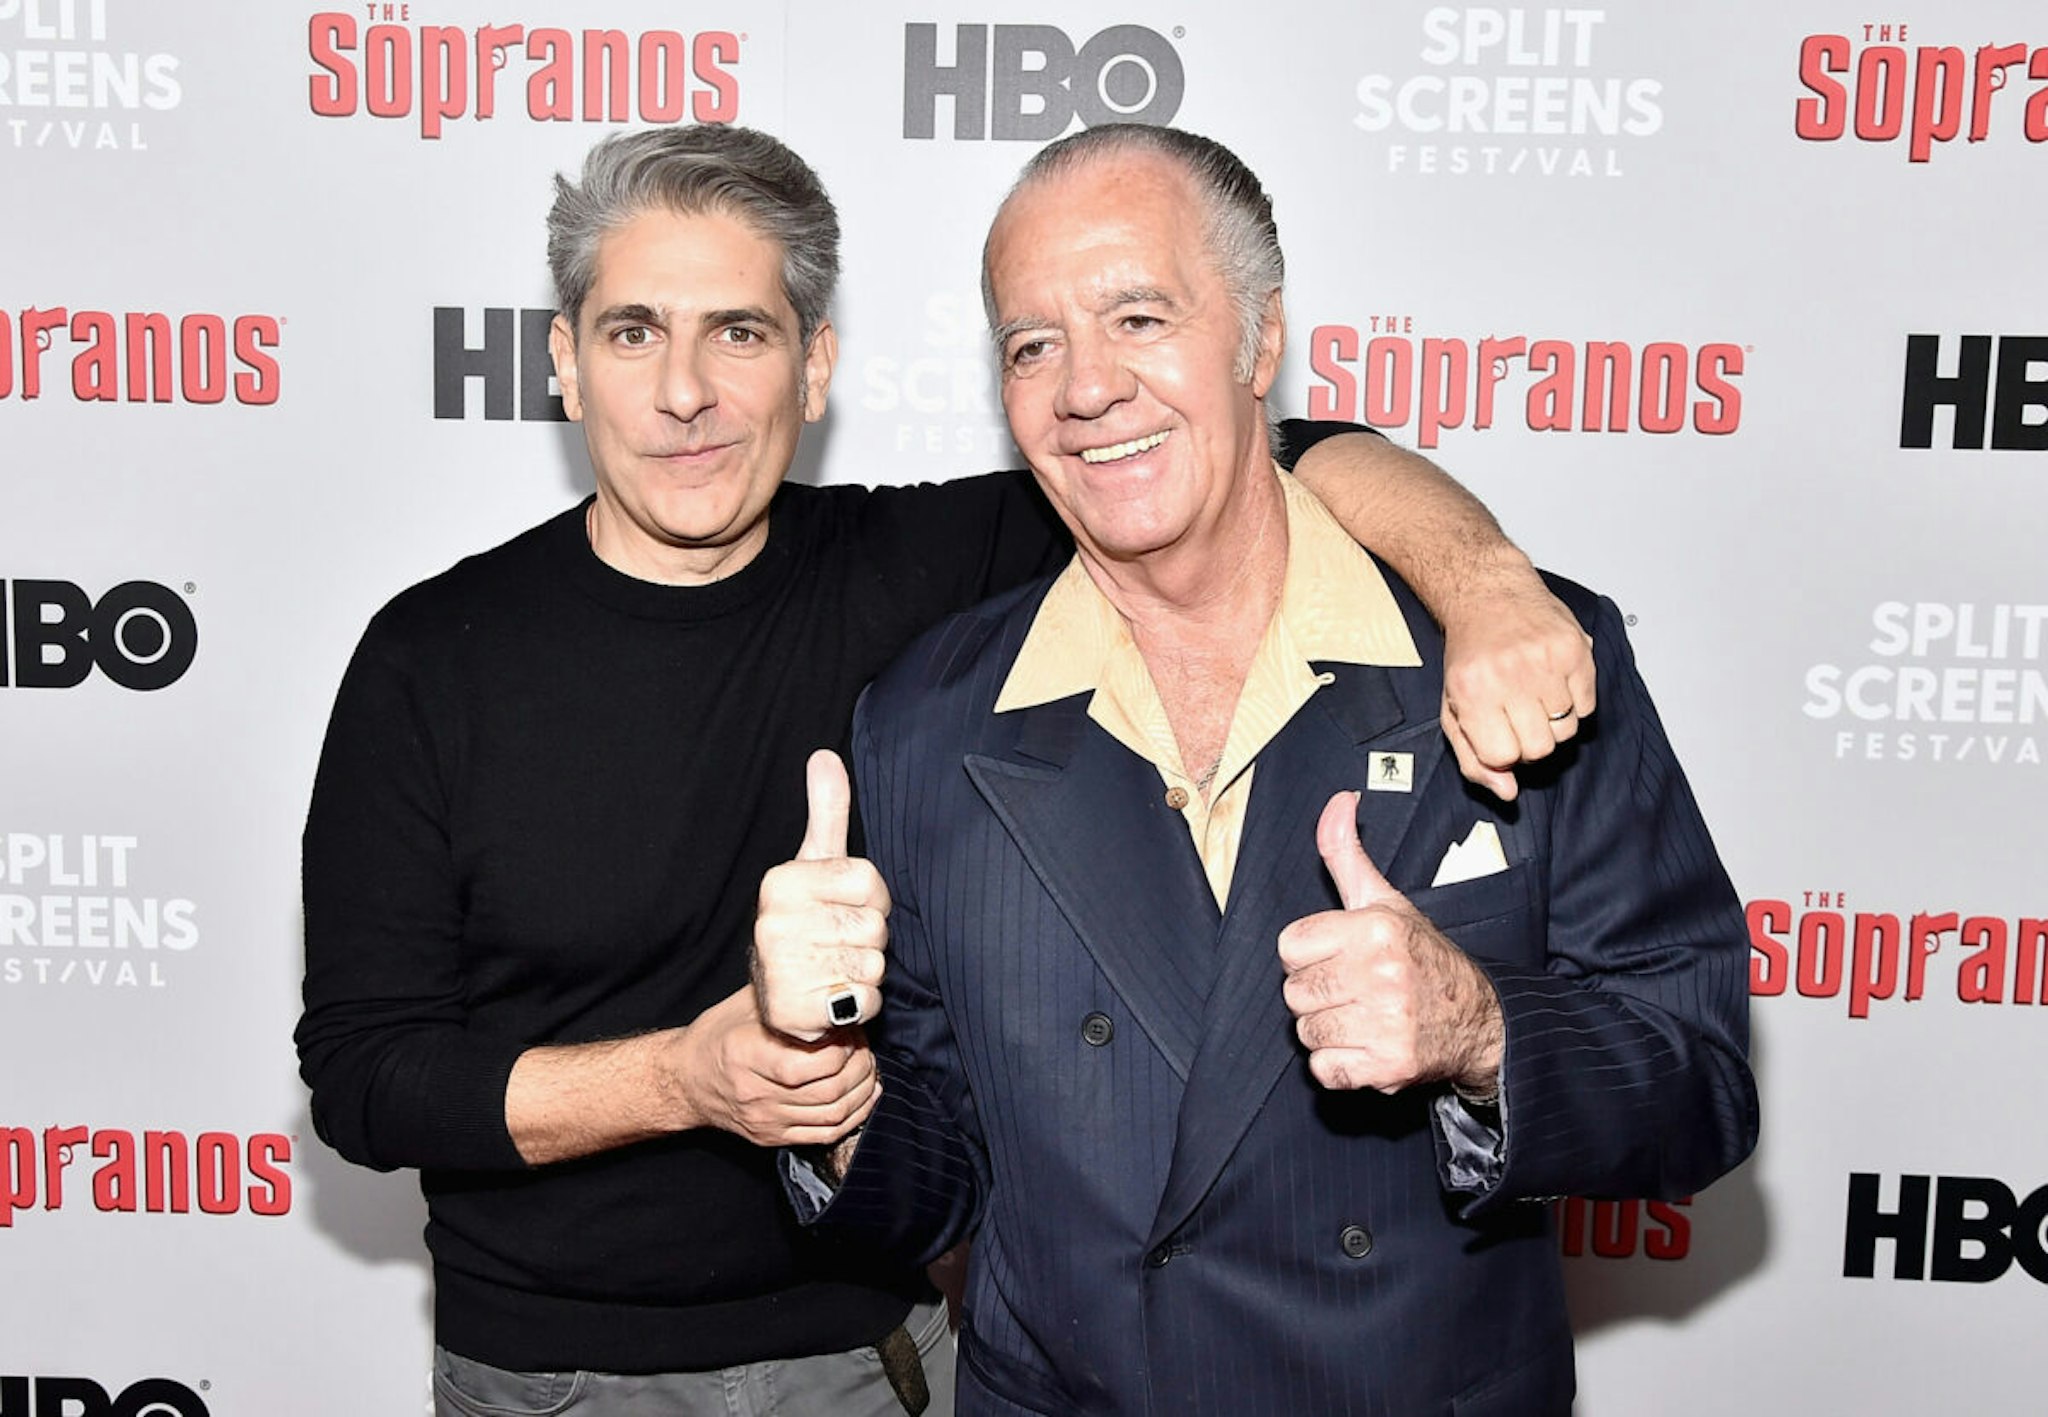 Michael Imperioli and Tony Sirico attend the "The Sopranos" 20th Anniversary Panel Discussion at SVA Theater on January 09, 2019 in New York City.